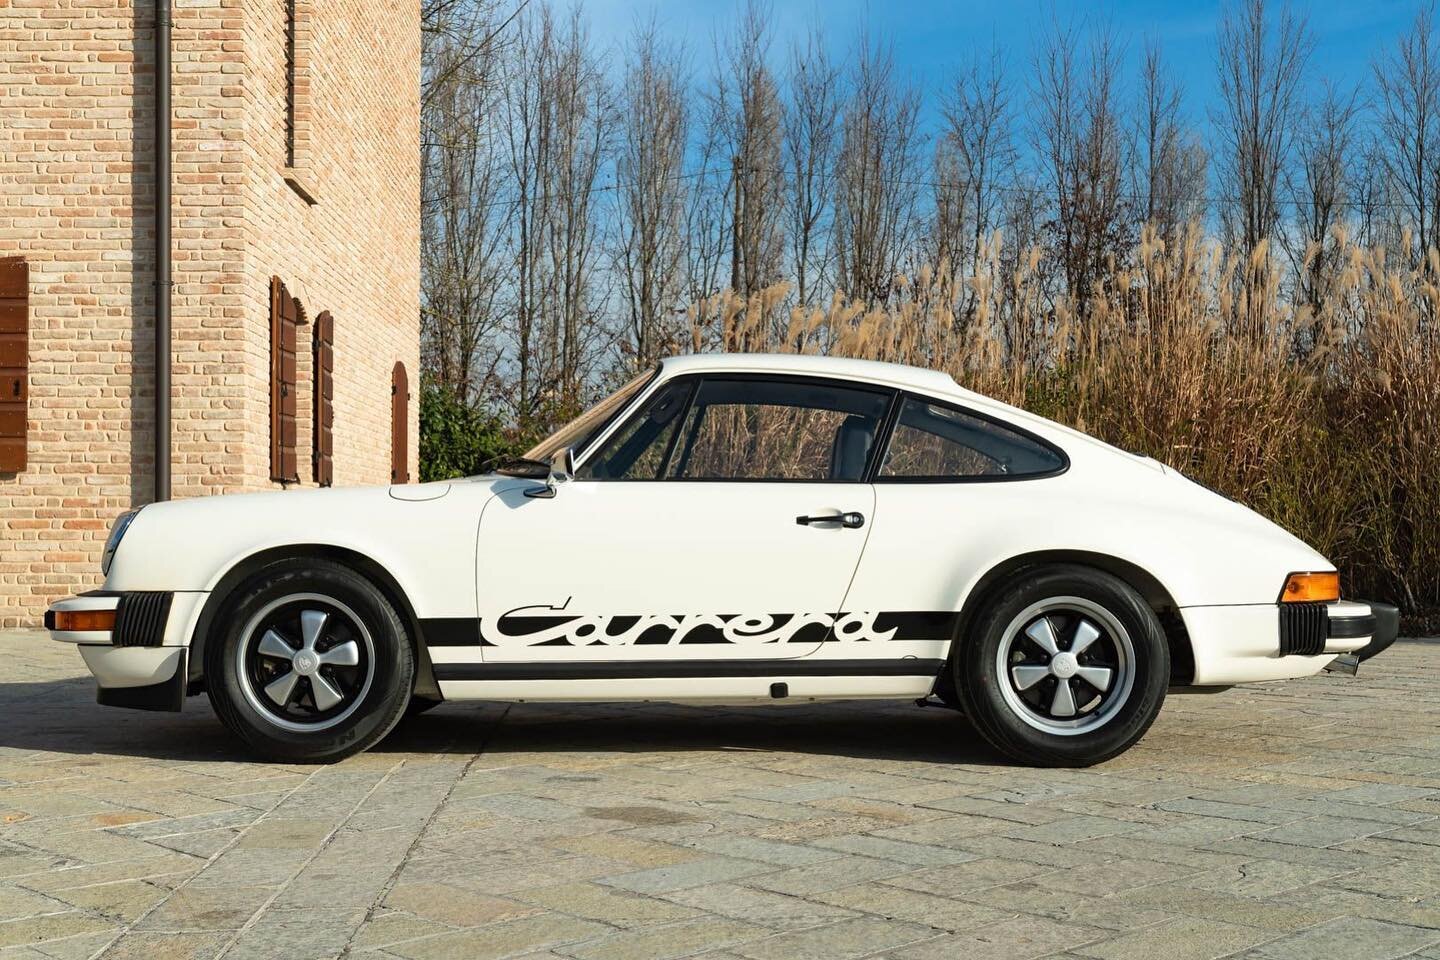 1974 Porsche 911 Carrera 2.7 MFI

Following the legendary 1973 Carrera 2.7 RS, in 1974 Porsche offered a high-performance fuel injected Carrera specifically for the European market. This rare and desirable Porsche was the G-series Carrera 2.7 MFI whi